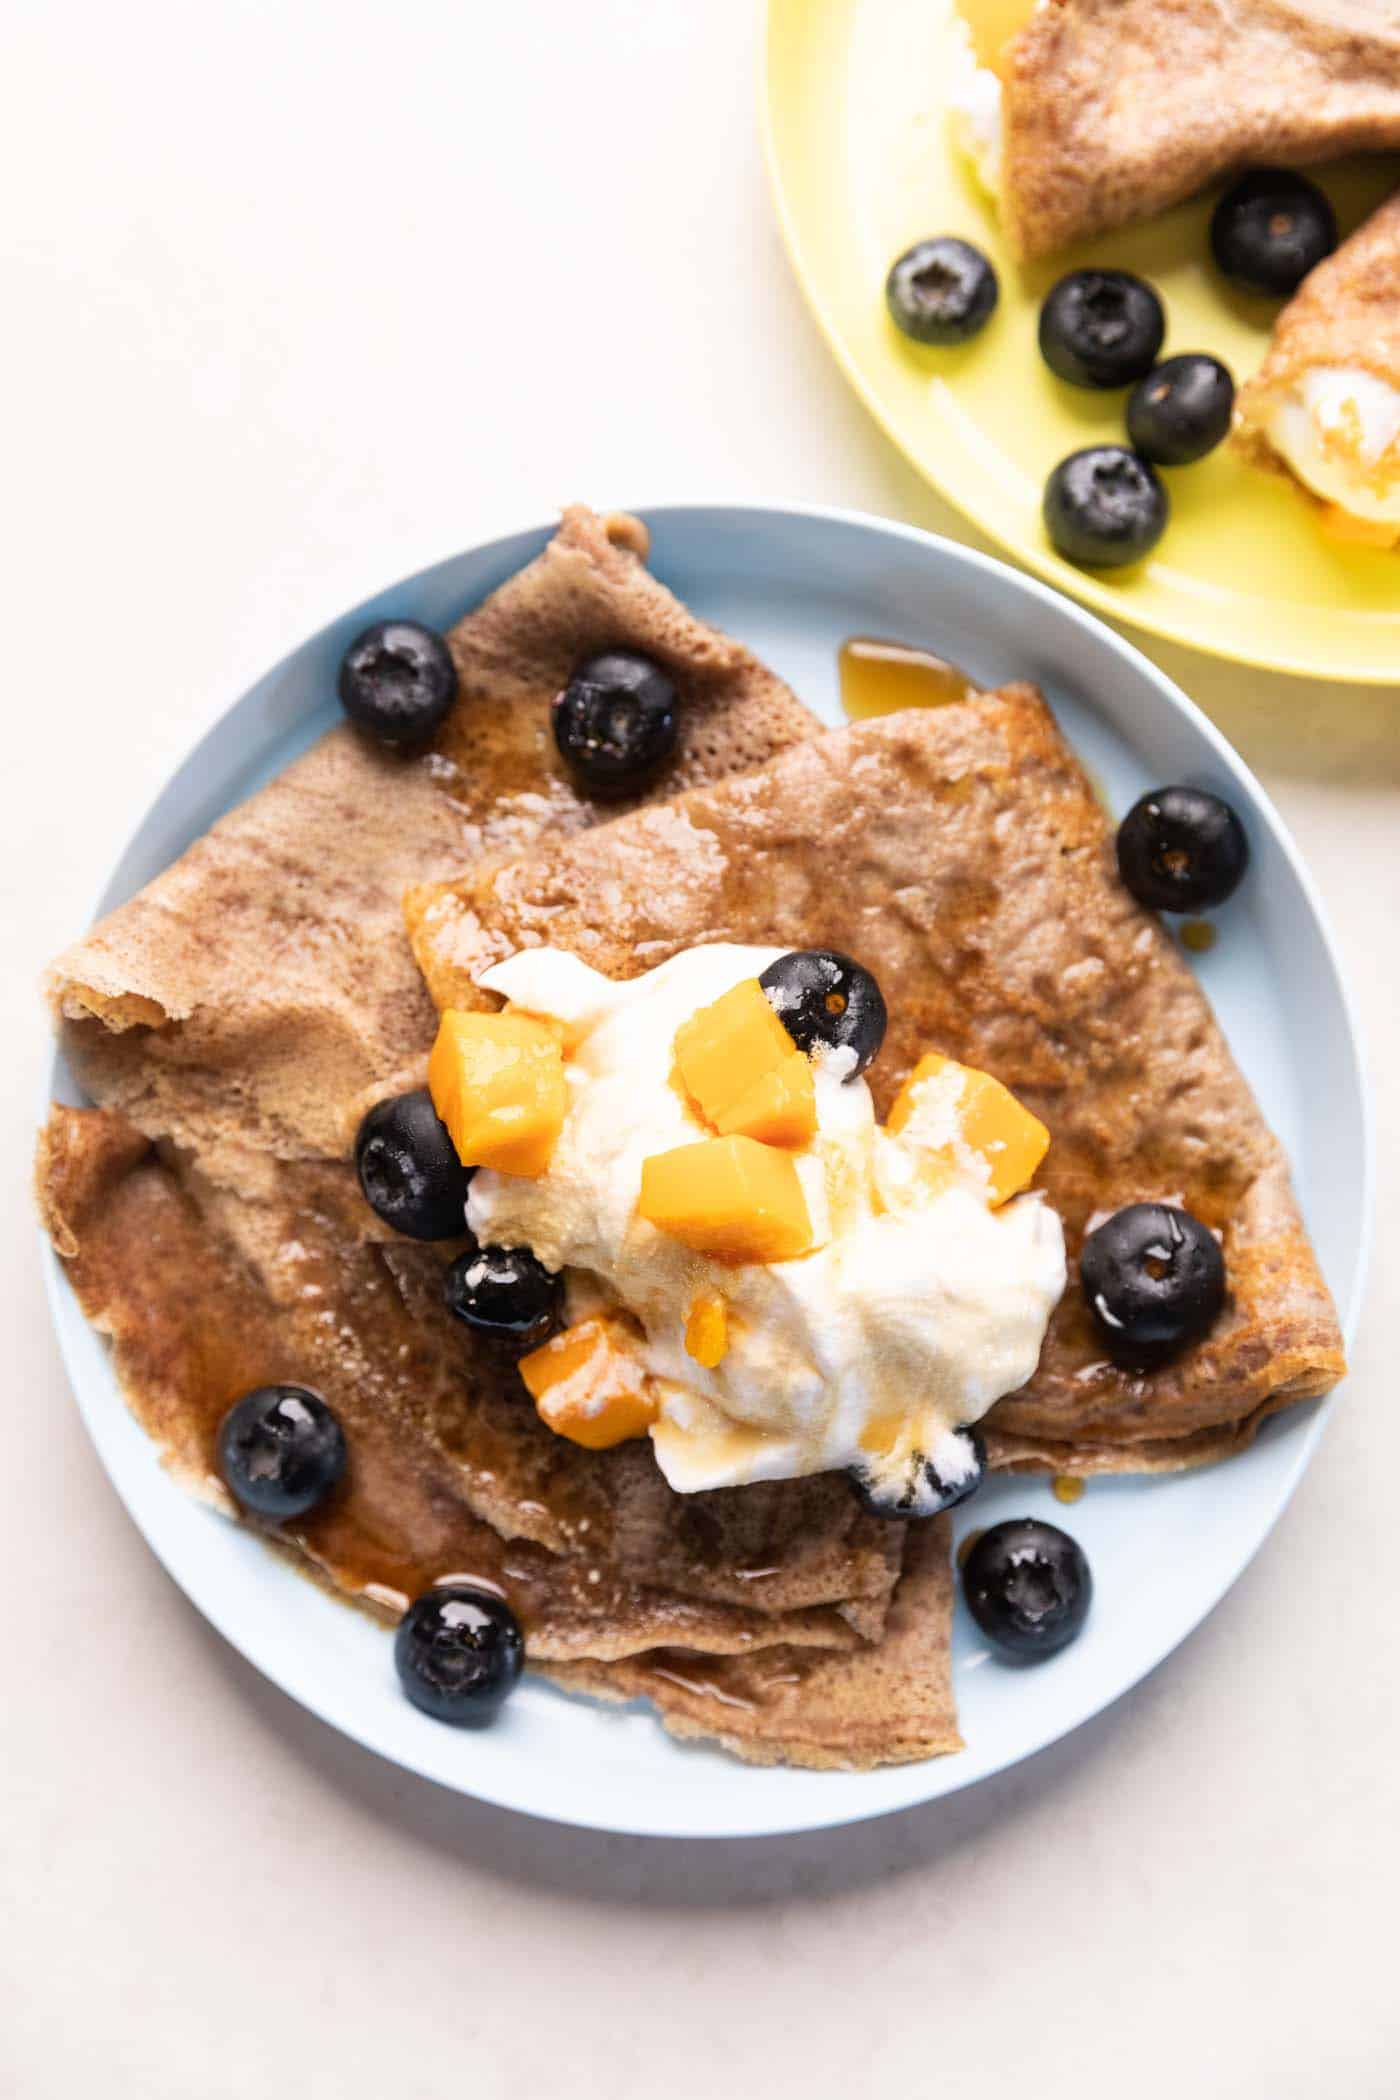 Ragi Crepes served on a plate topped with whipped cream, mango and blueberries